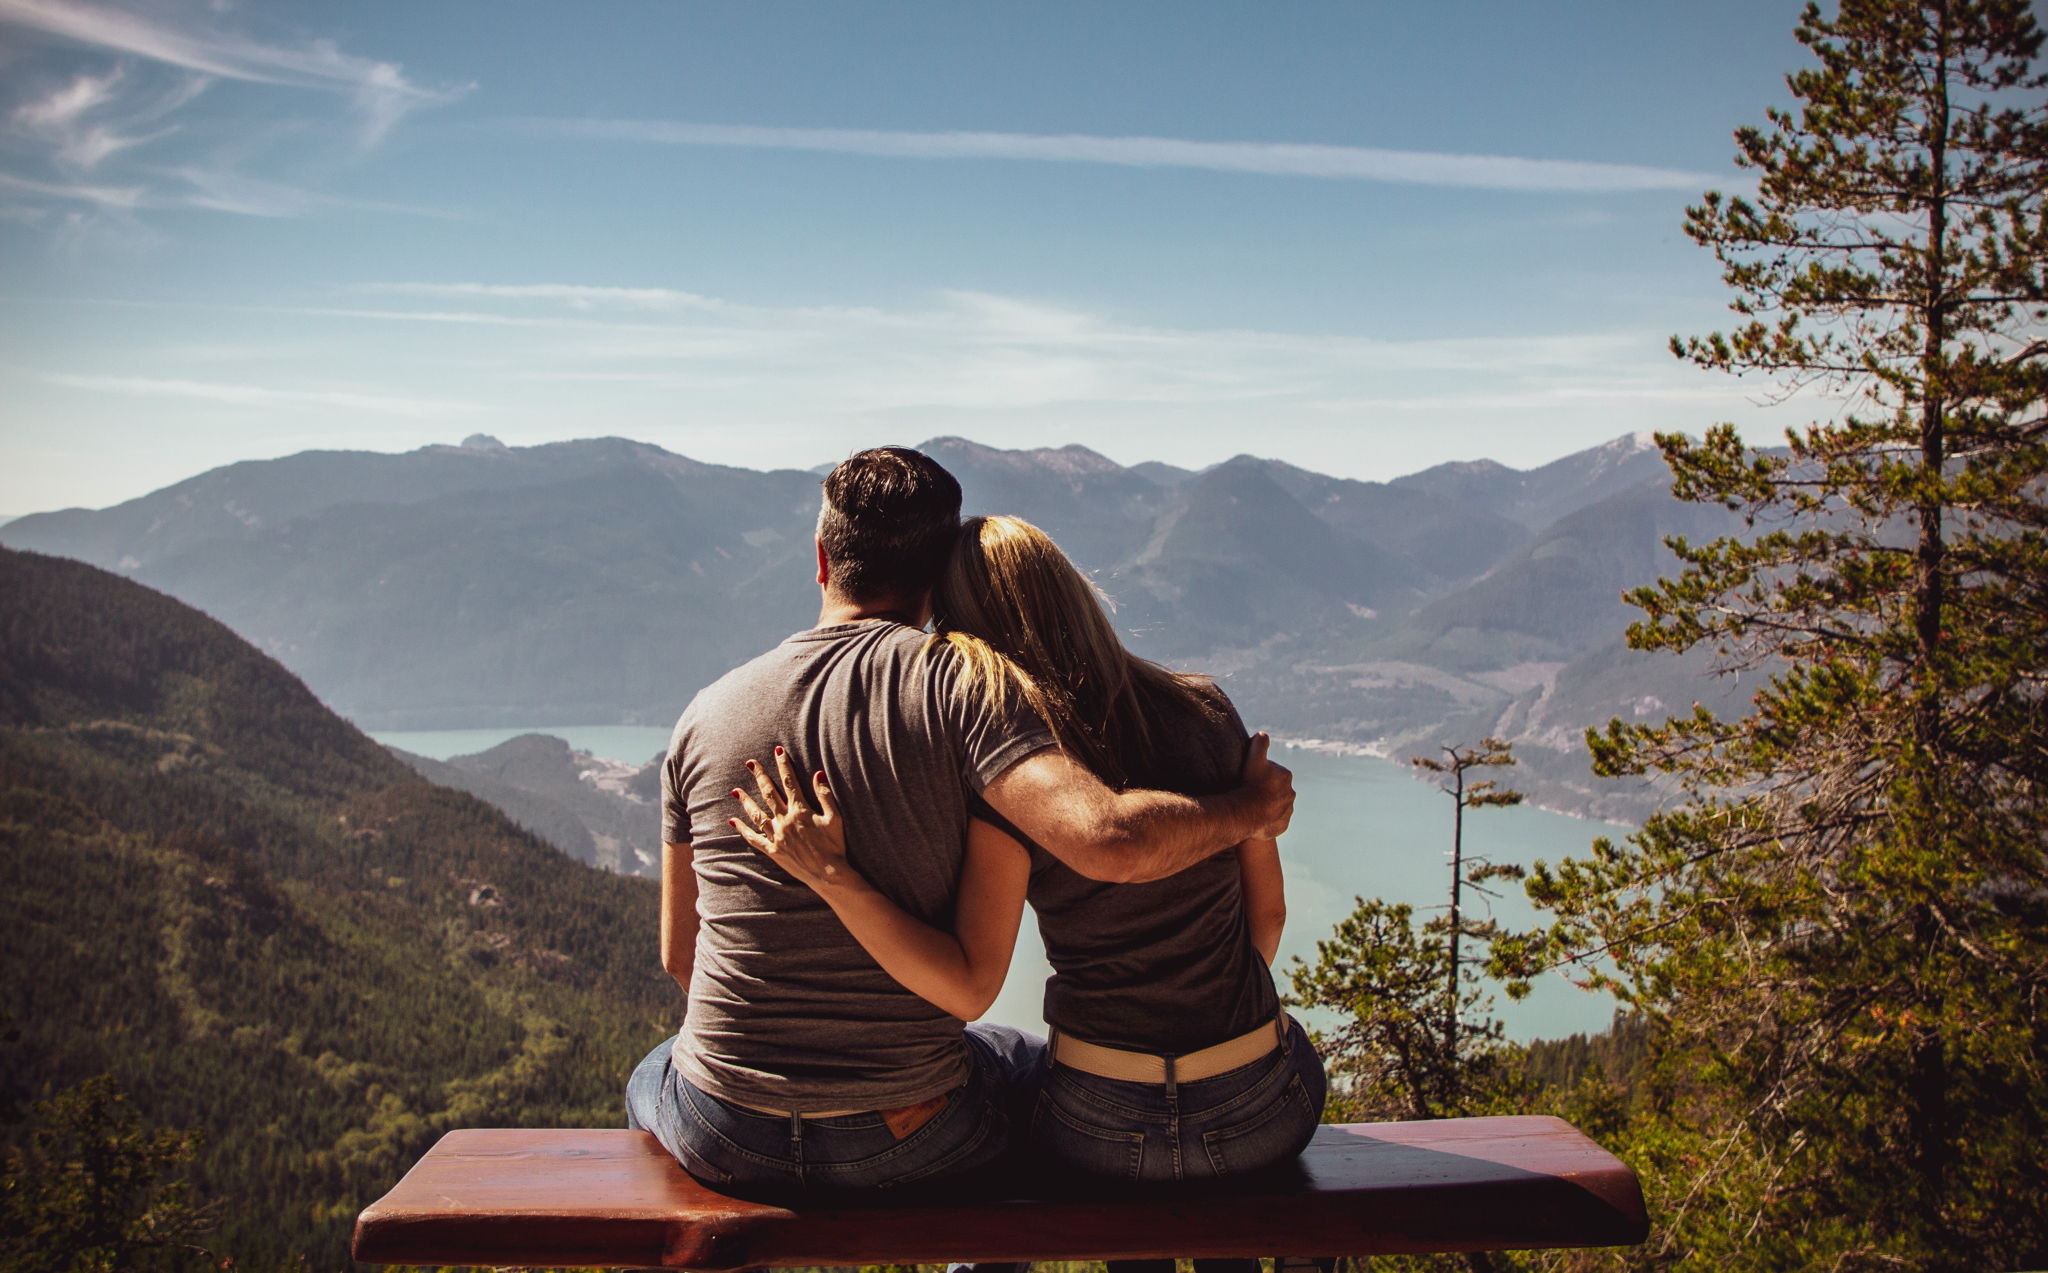 A man and a woman sit on a bench overlooking a beautiful scenery holding eachother.